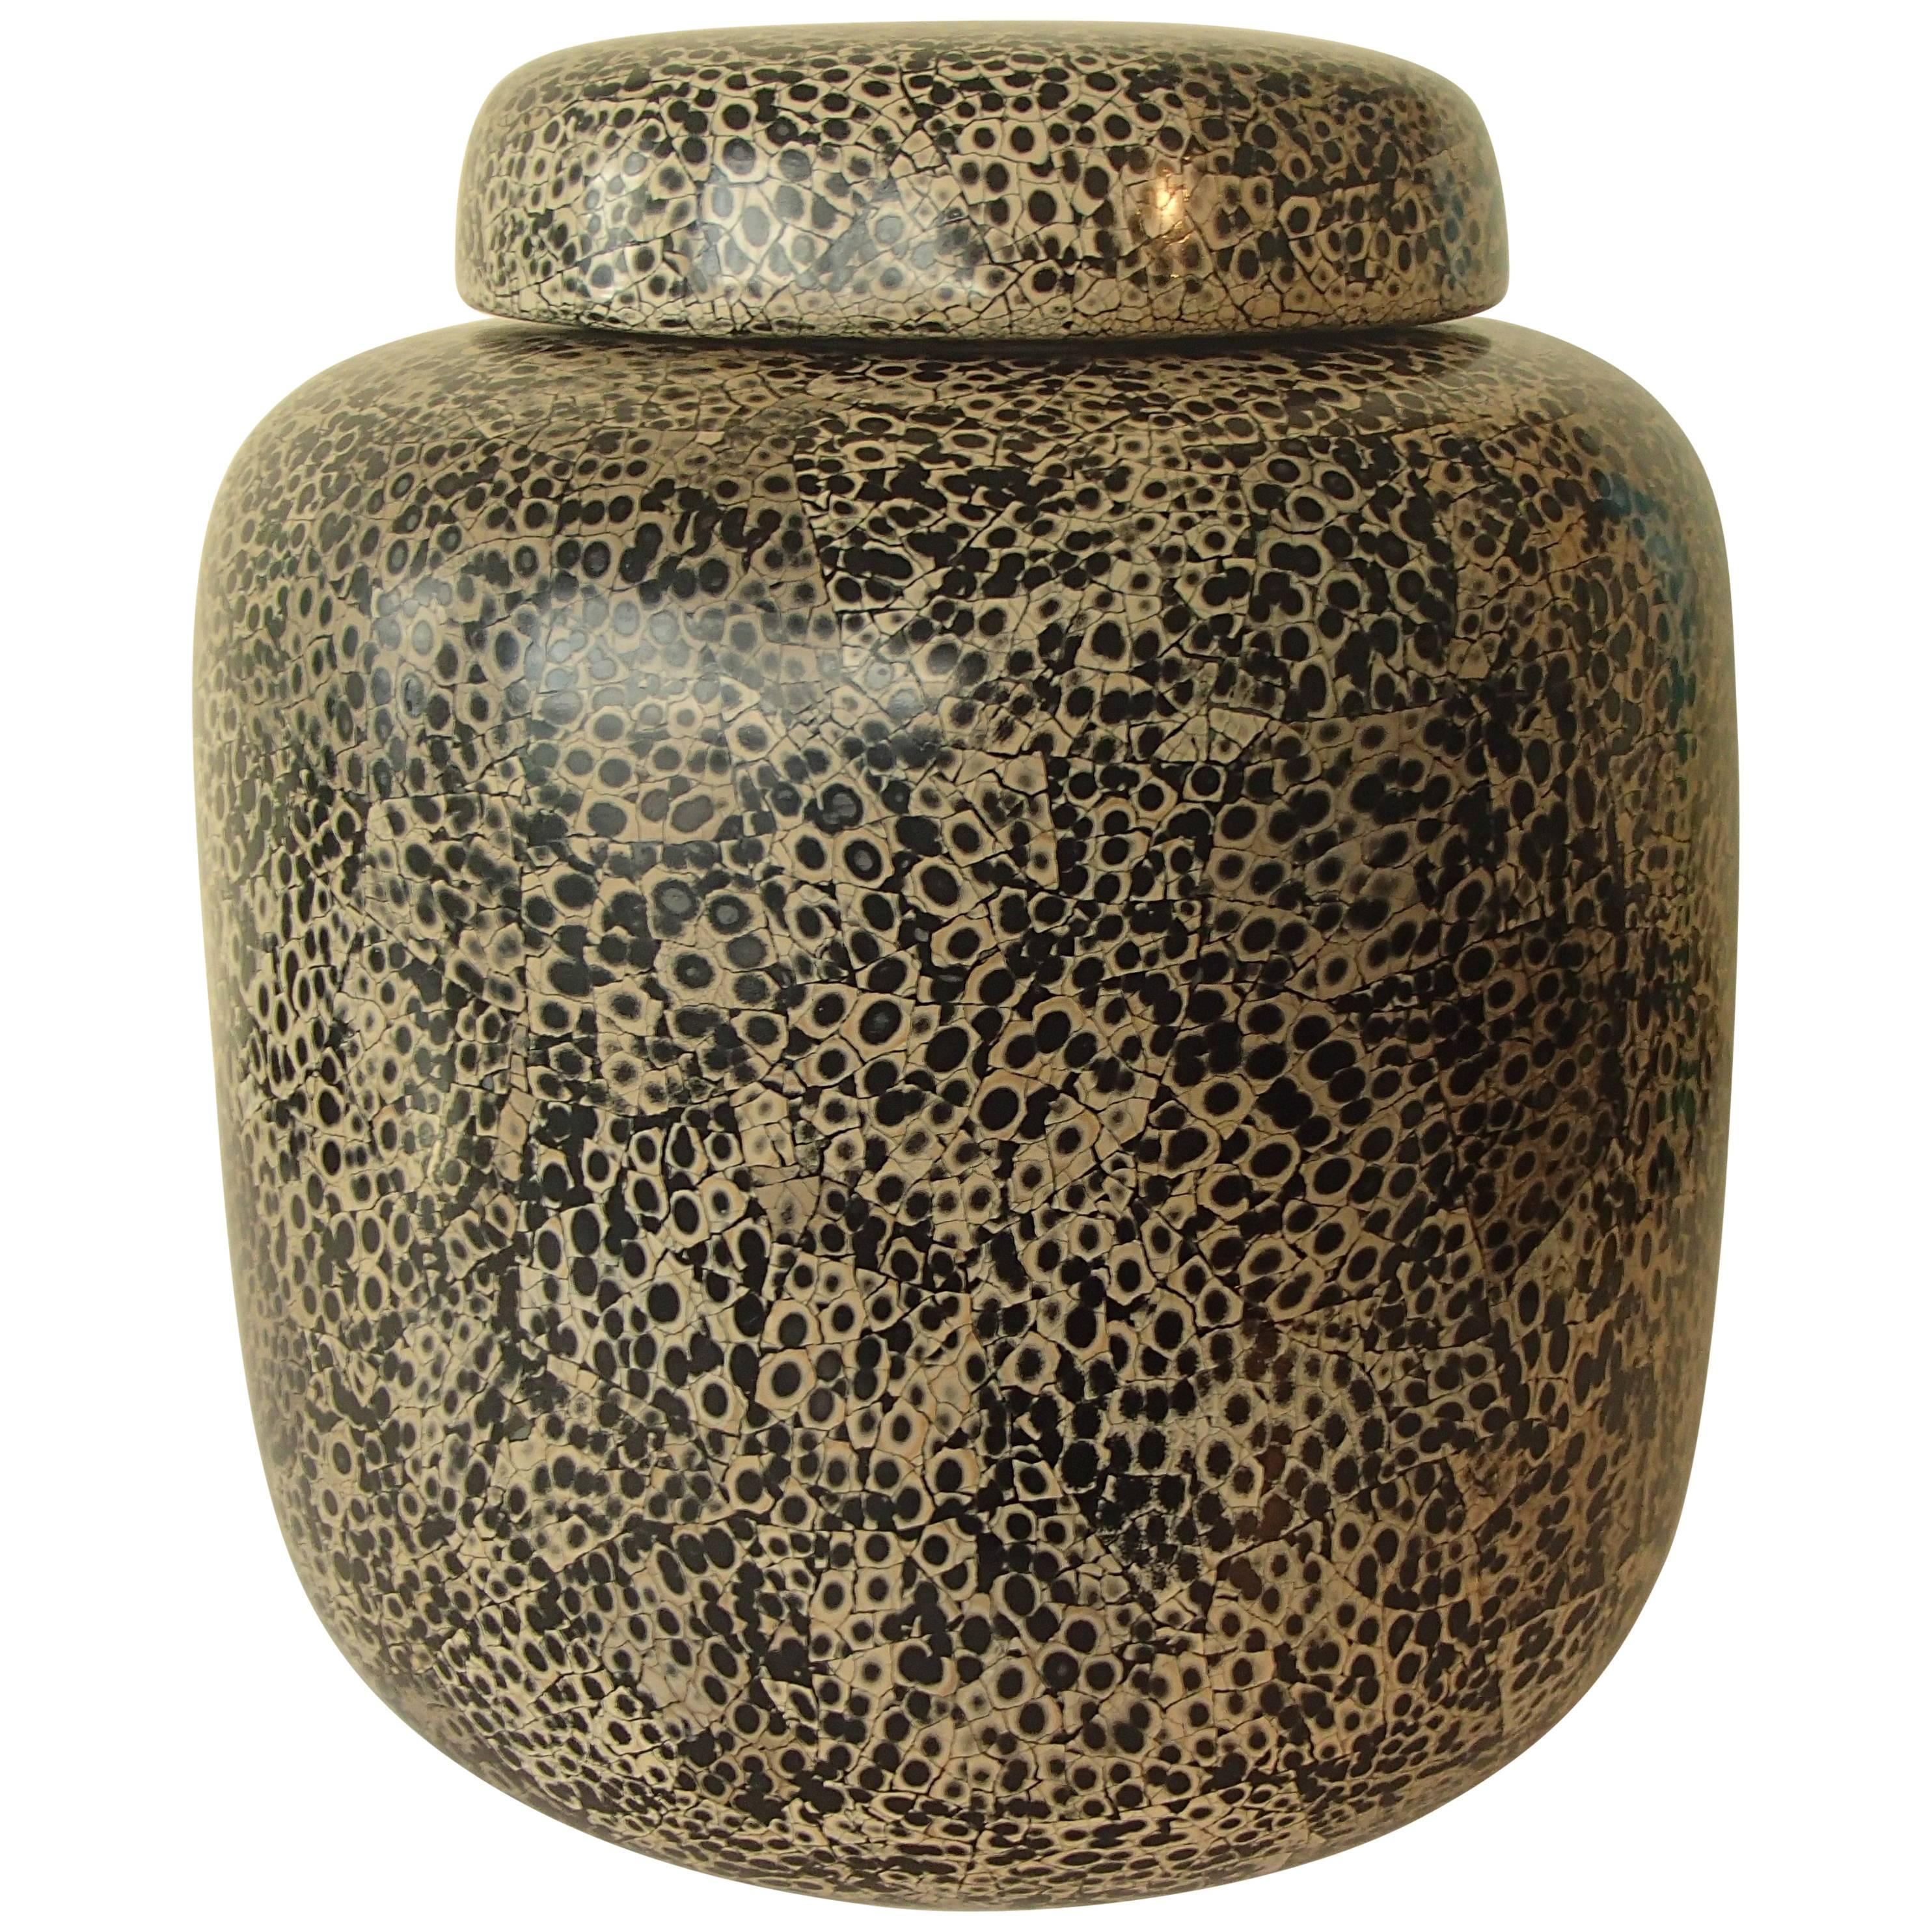 Modern Ceramic Vase with Lid Cream and Black by Les Comproir D'annam